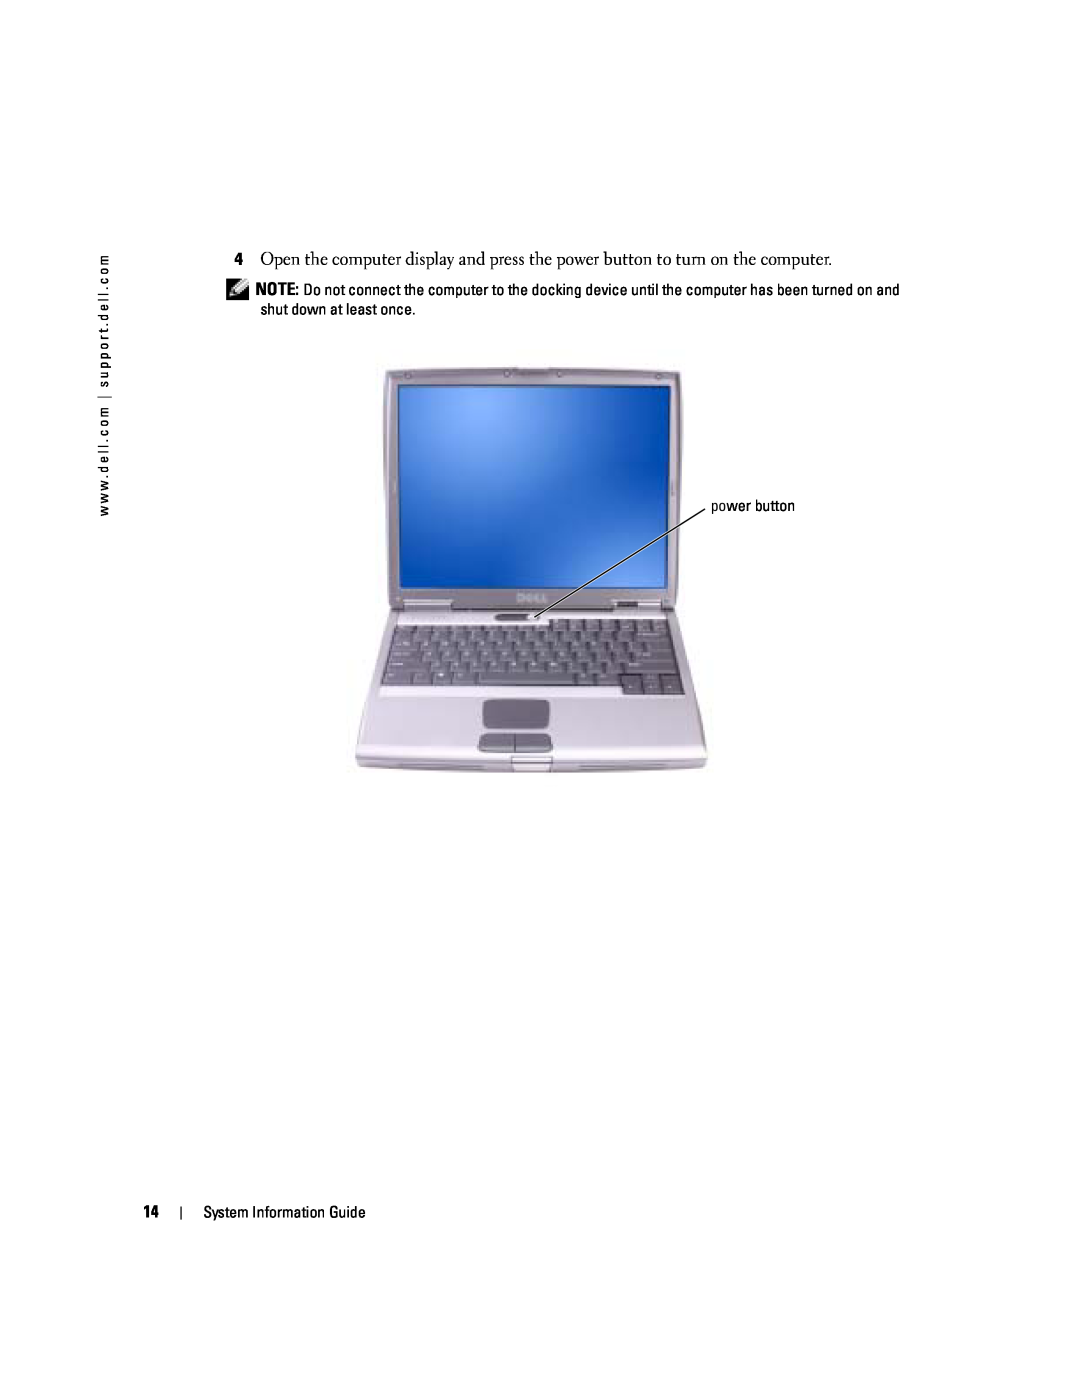 Dell D505 manual power button, System Information Guide 